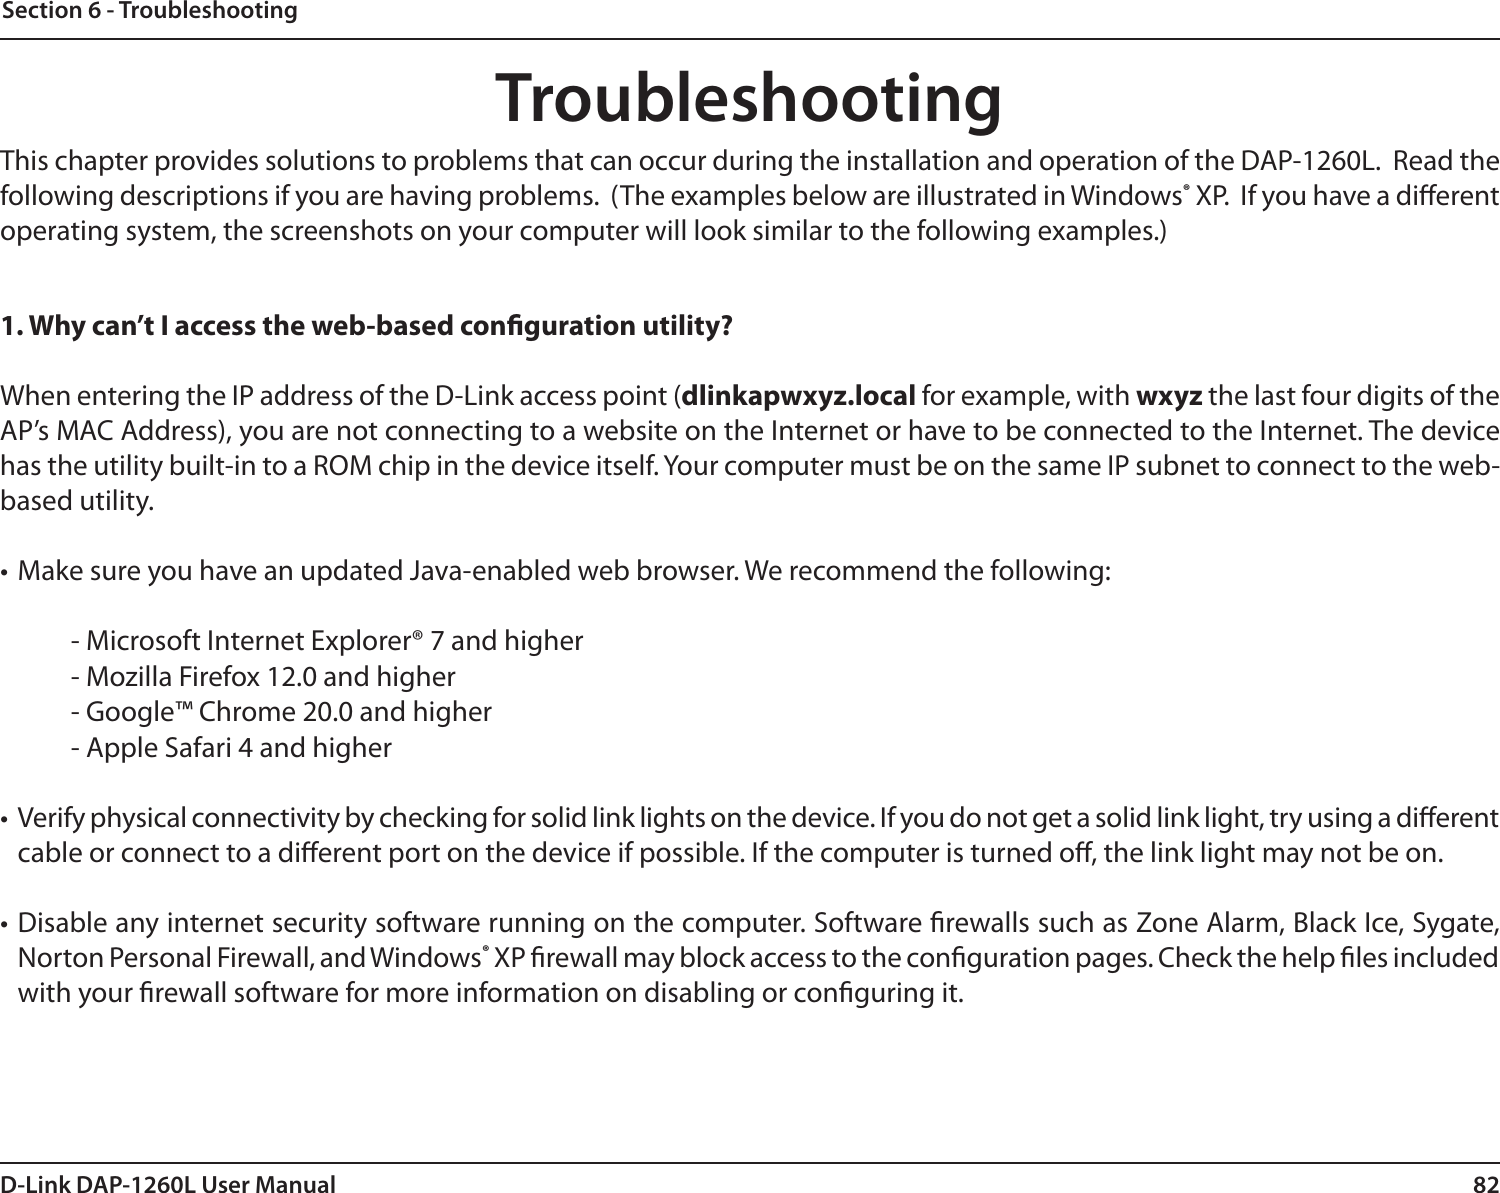 82D-Link DAP-1260L User ManualSection 6 - TroubleshootingTroubleshootingThis chapter provides solutions to problems that can occur during the installation and operation of the DAP-1260L.  Read the following descriptions if you are having problems.  (The examples below are illustrated in Windows® XP.  If you have a dierent operating system, the screenshots on your computer will look similar to the following examples.)1. Why can’t I access the web-based conguration utility?When entering the IP address of the D-Link access point (dlinkapwxyz.local for example, with wxyz the last four digits of the AP’s MAC Address), you are not connecting to a website on the Internet or have to be connected to the Internet. The device has the utility built-in to a ROM chip in the device itself. Your computer must be on the same IP subnet to connect to the web-based utility. • Make sure you have an updated Java-enabled web browser. We recommend the following: - Microsoft Internet Explorer® 7 and higher- Mozilla Firefox 12.0 and higher- Google™ Chrome 20.0 and higher- Apple Safari 4 and higher• Verify physical connectivity by checking for solid link lights on the device. If you do not get a solid link light, try using a dierent cable or connect to a dierent port on the device if possible. If the computer is turned o, the link light may not be on.• Disable any internet security software running on the computer. Software rewalls such as Zone Alarm, Black Ice, Sygate, Norton Personal Firewall, and Windows® XP rewall may block access to the conguration pages. Check the help les included with your rewall software for more information on disabling or conguring it.